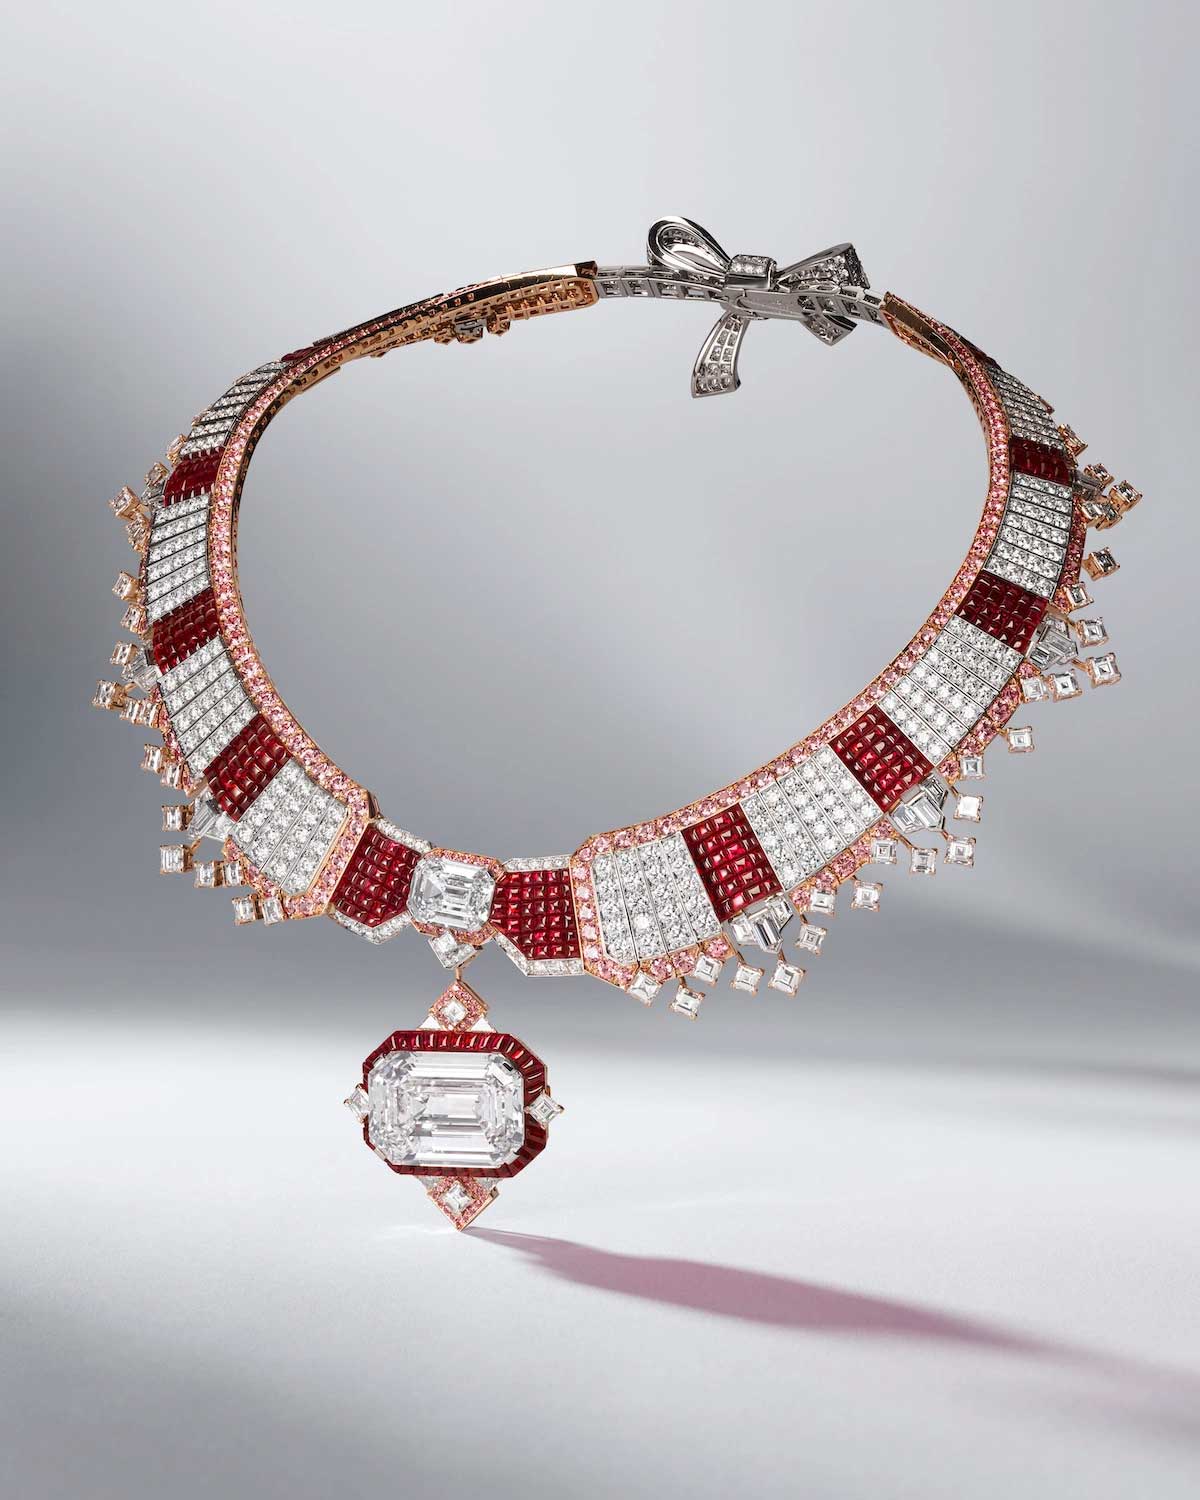 Top more than 64 van cleef and arpels diamond necklace super hot ...